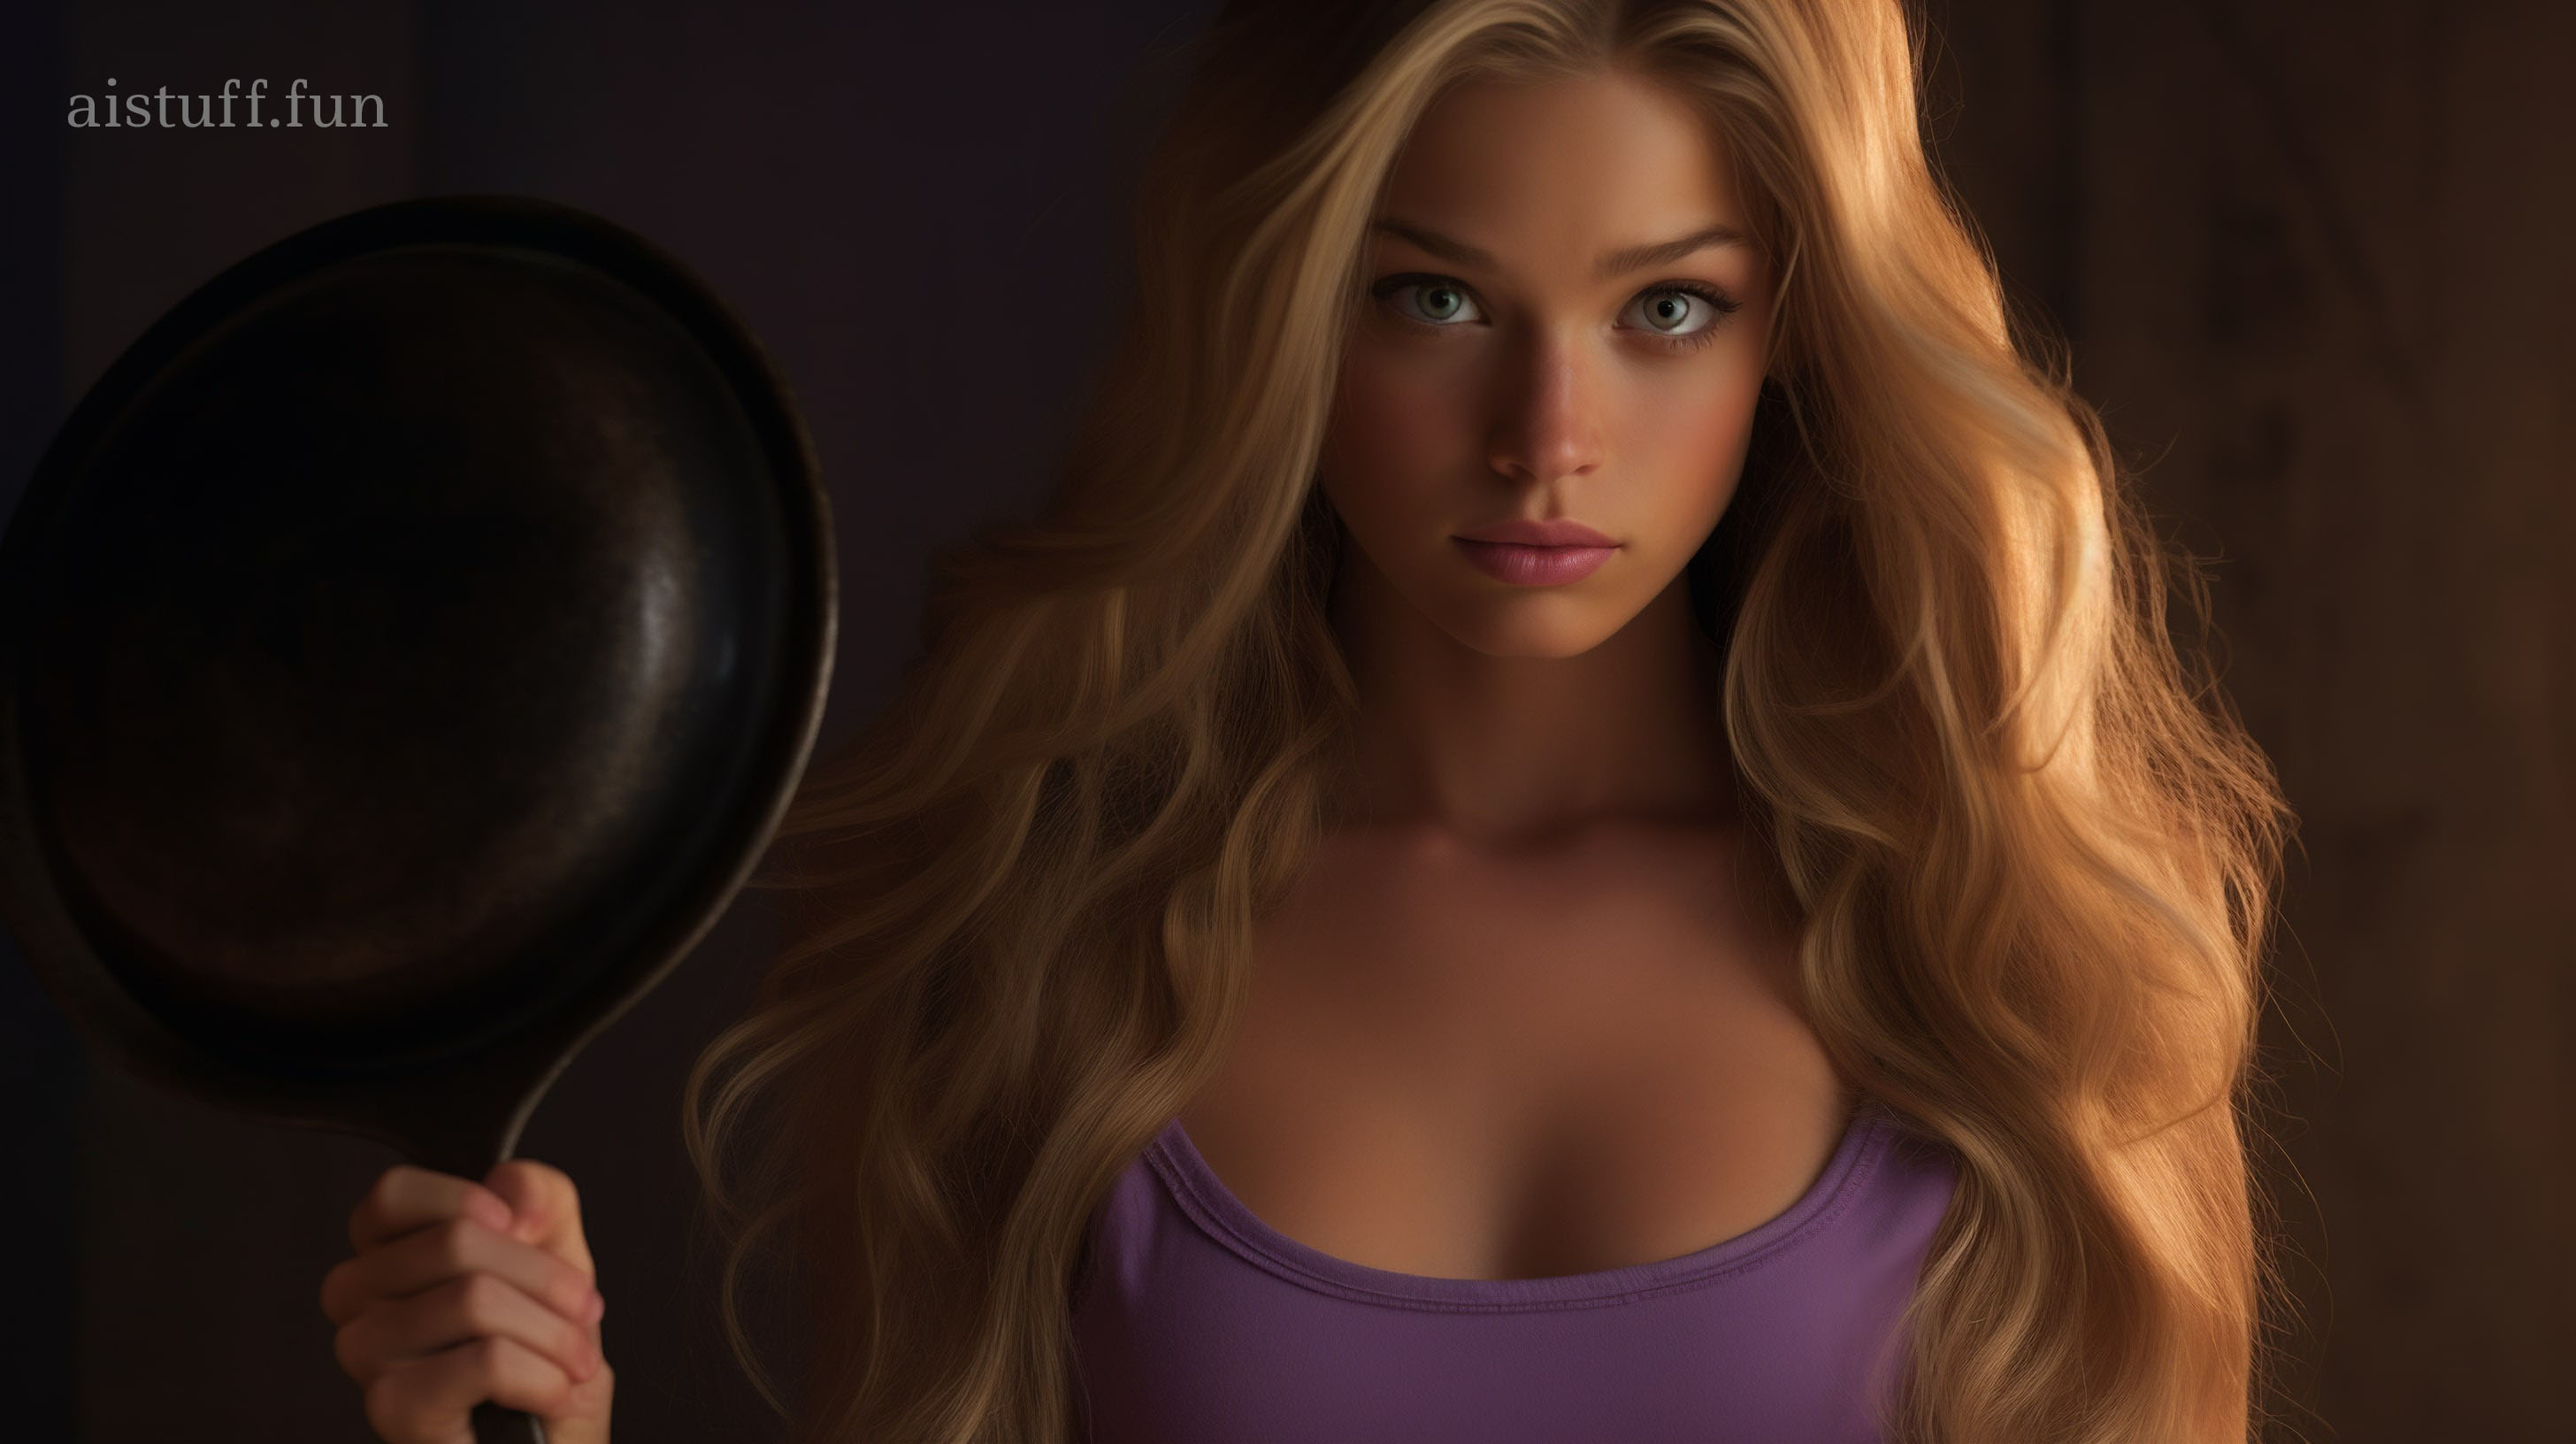 A girl with golden hair holds a frying pan in her hands